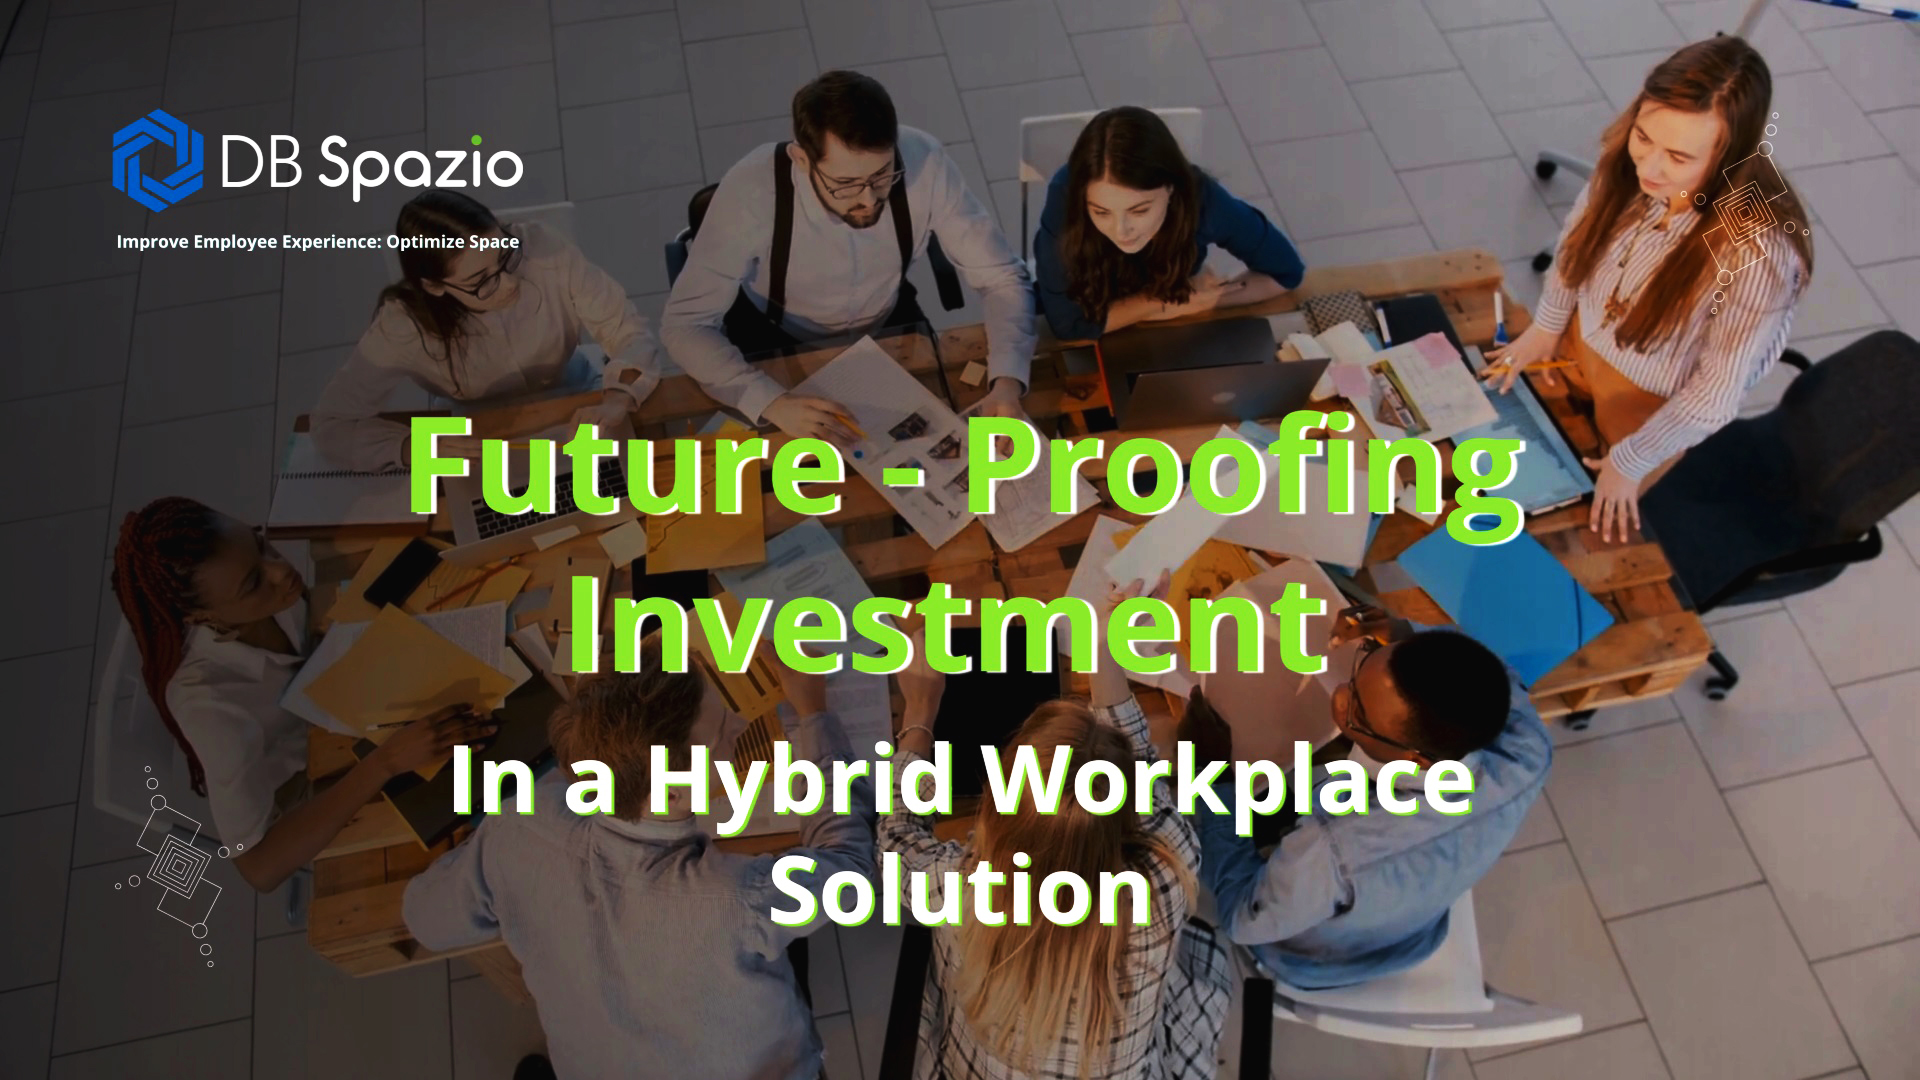 This image is a thumbnail to a video called future proofing your investment in a hybrid workplace technology platform.